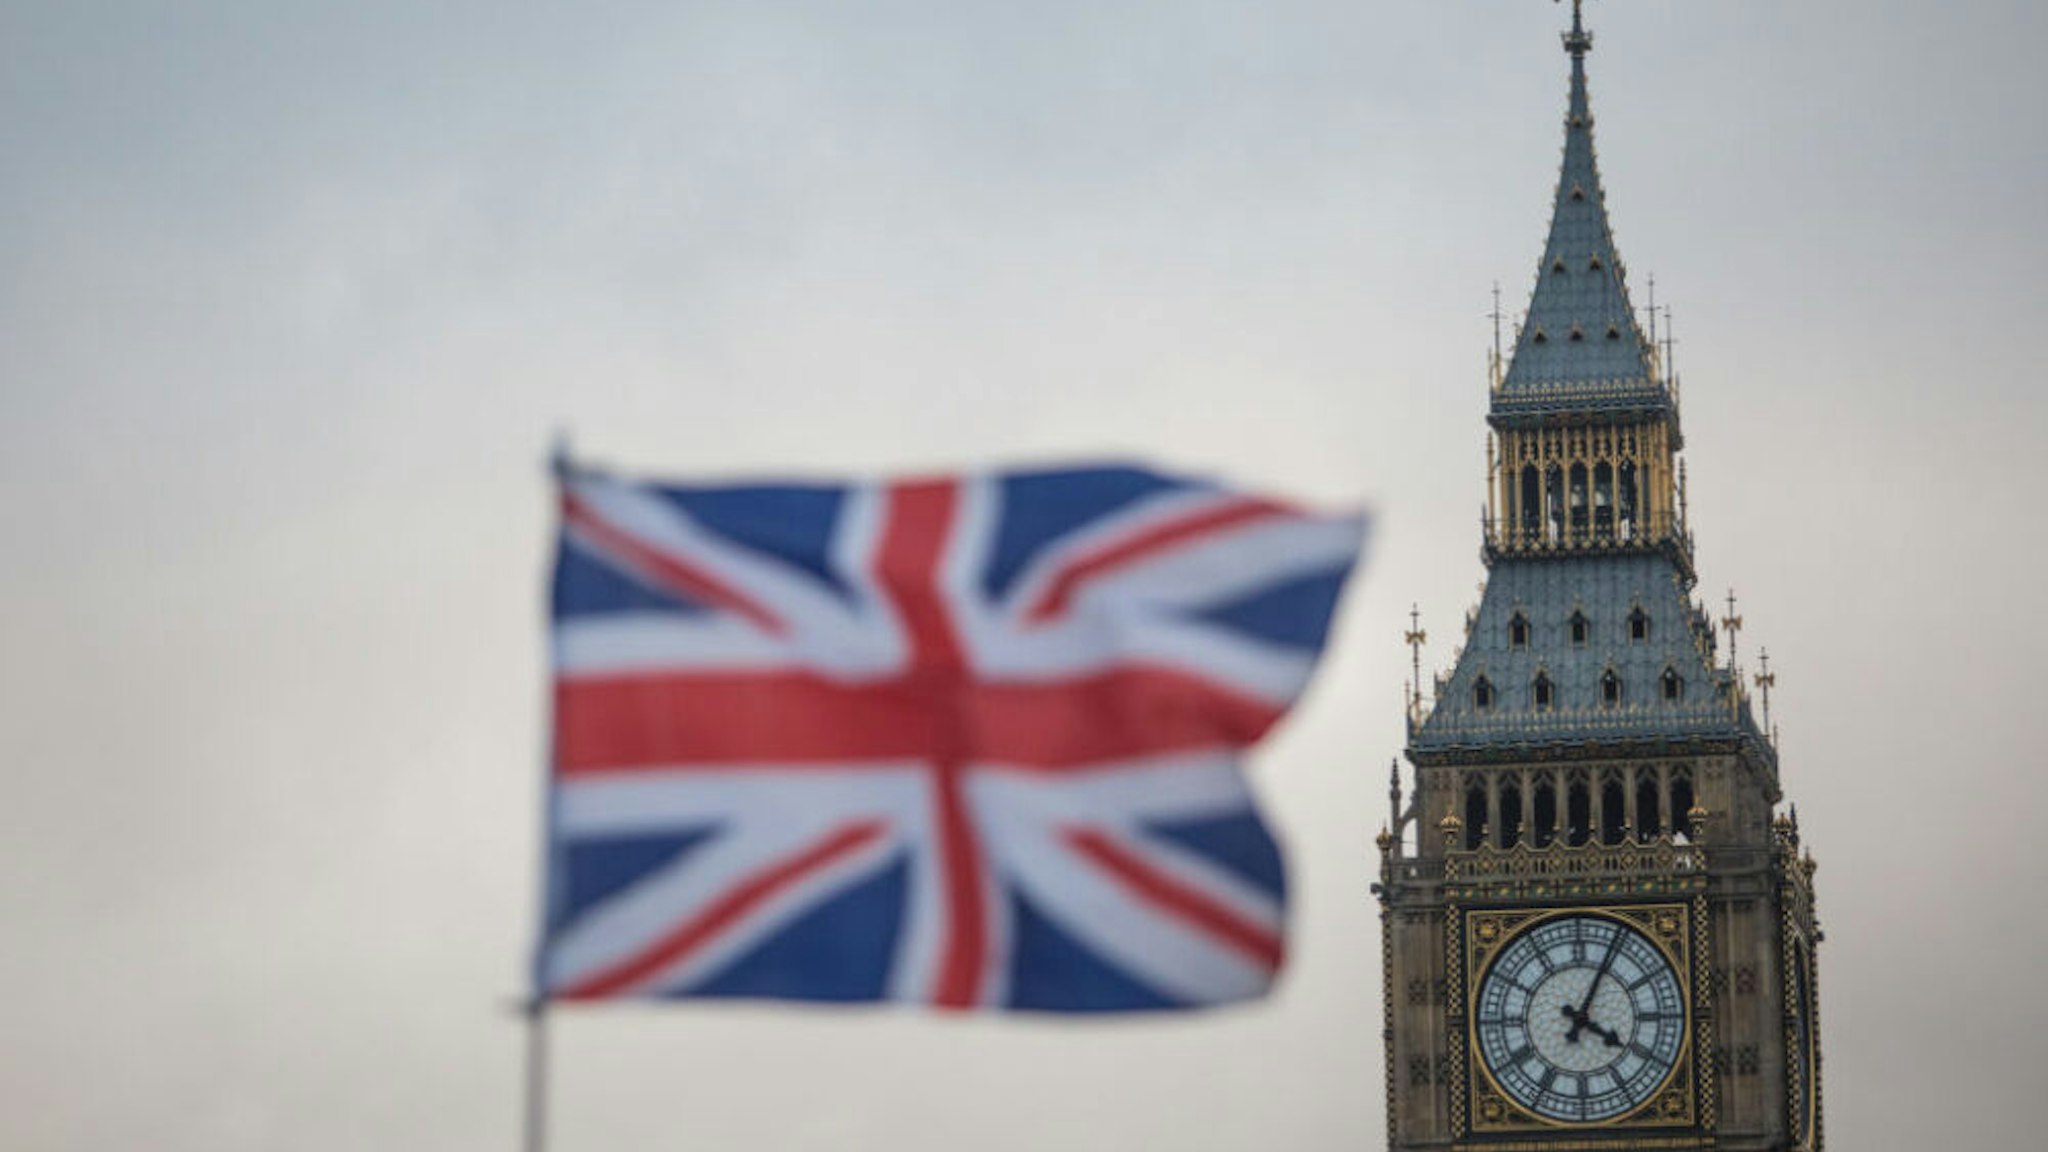 LONDON, ENGLAND - FEBRUARY 01: A Union Jack flag flutters in front of the Elizabeth Tower, commonly known as Big Ben on February 1, 2017 in London, England. The European Union (notification of withdrawal) bill that will trigger article 50 is being debated by MPs over two days. The vote will take place on tomorrow evening. Labour MPs are subject to a three-line whip after Jeremy Corbyn urged his party to vote for Article 50.